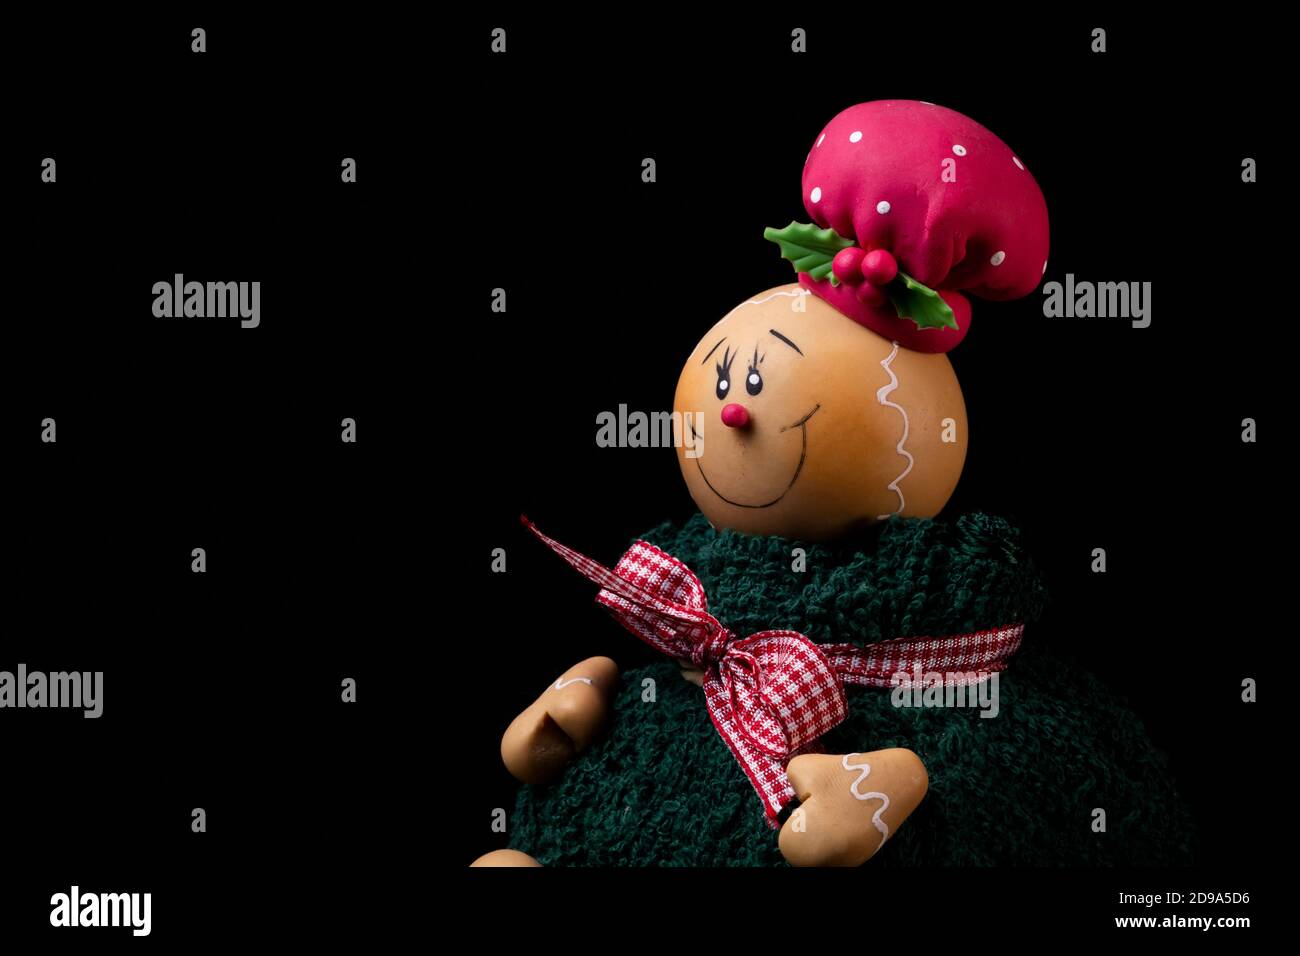 Gingerbread man figure for christmas Stock Photo